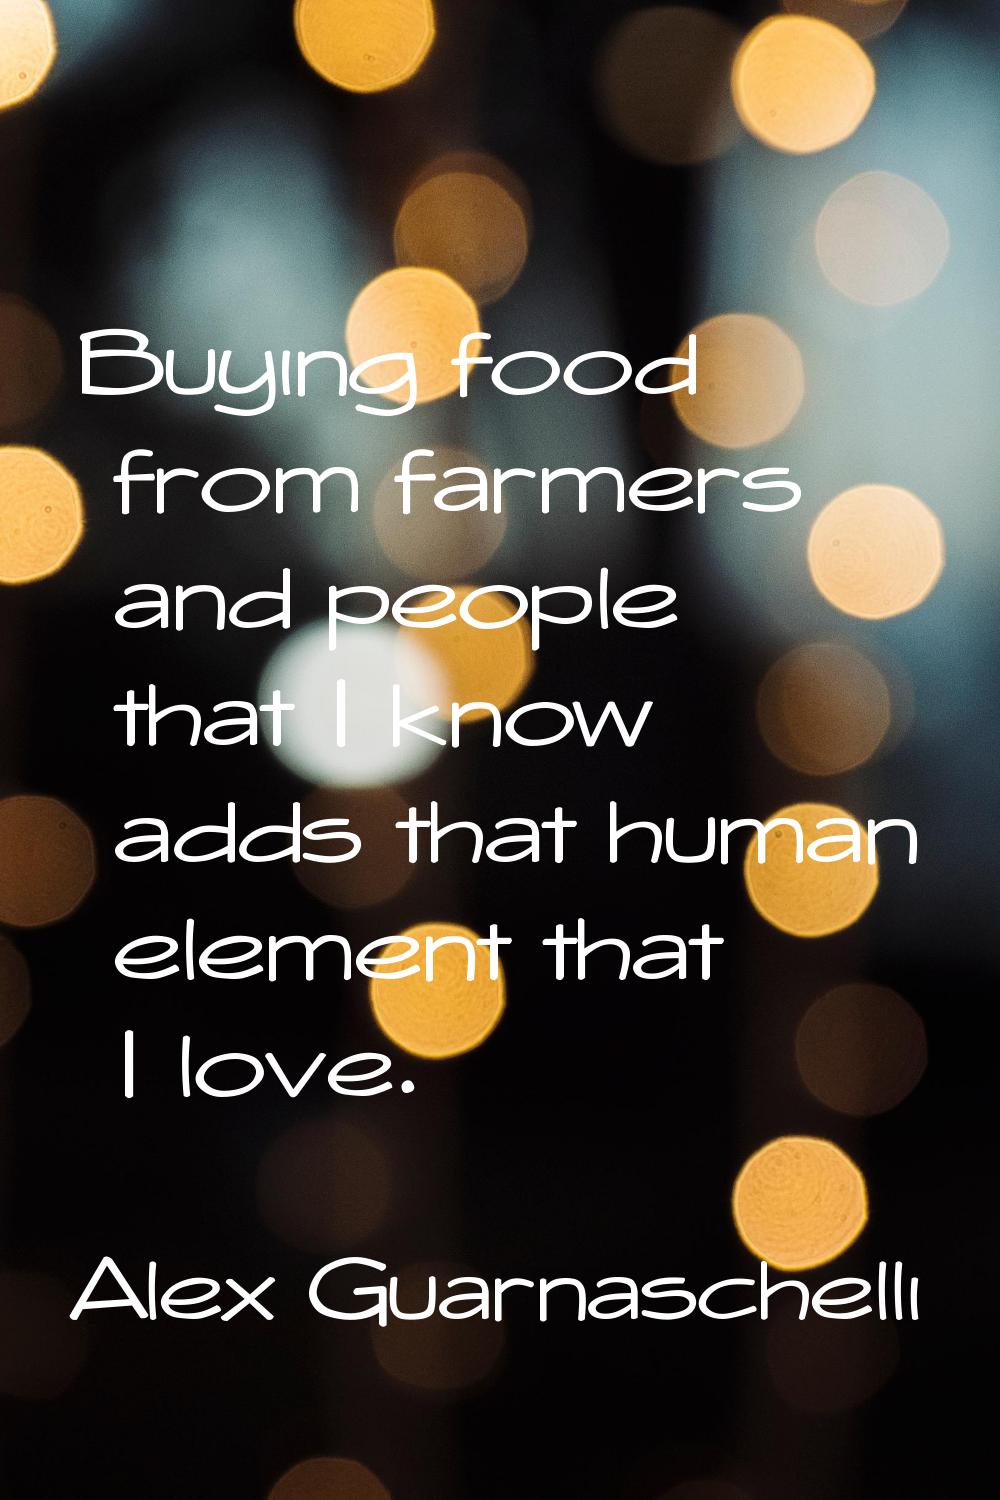 Buying food from farmers and people that I know adds that human element that I love.